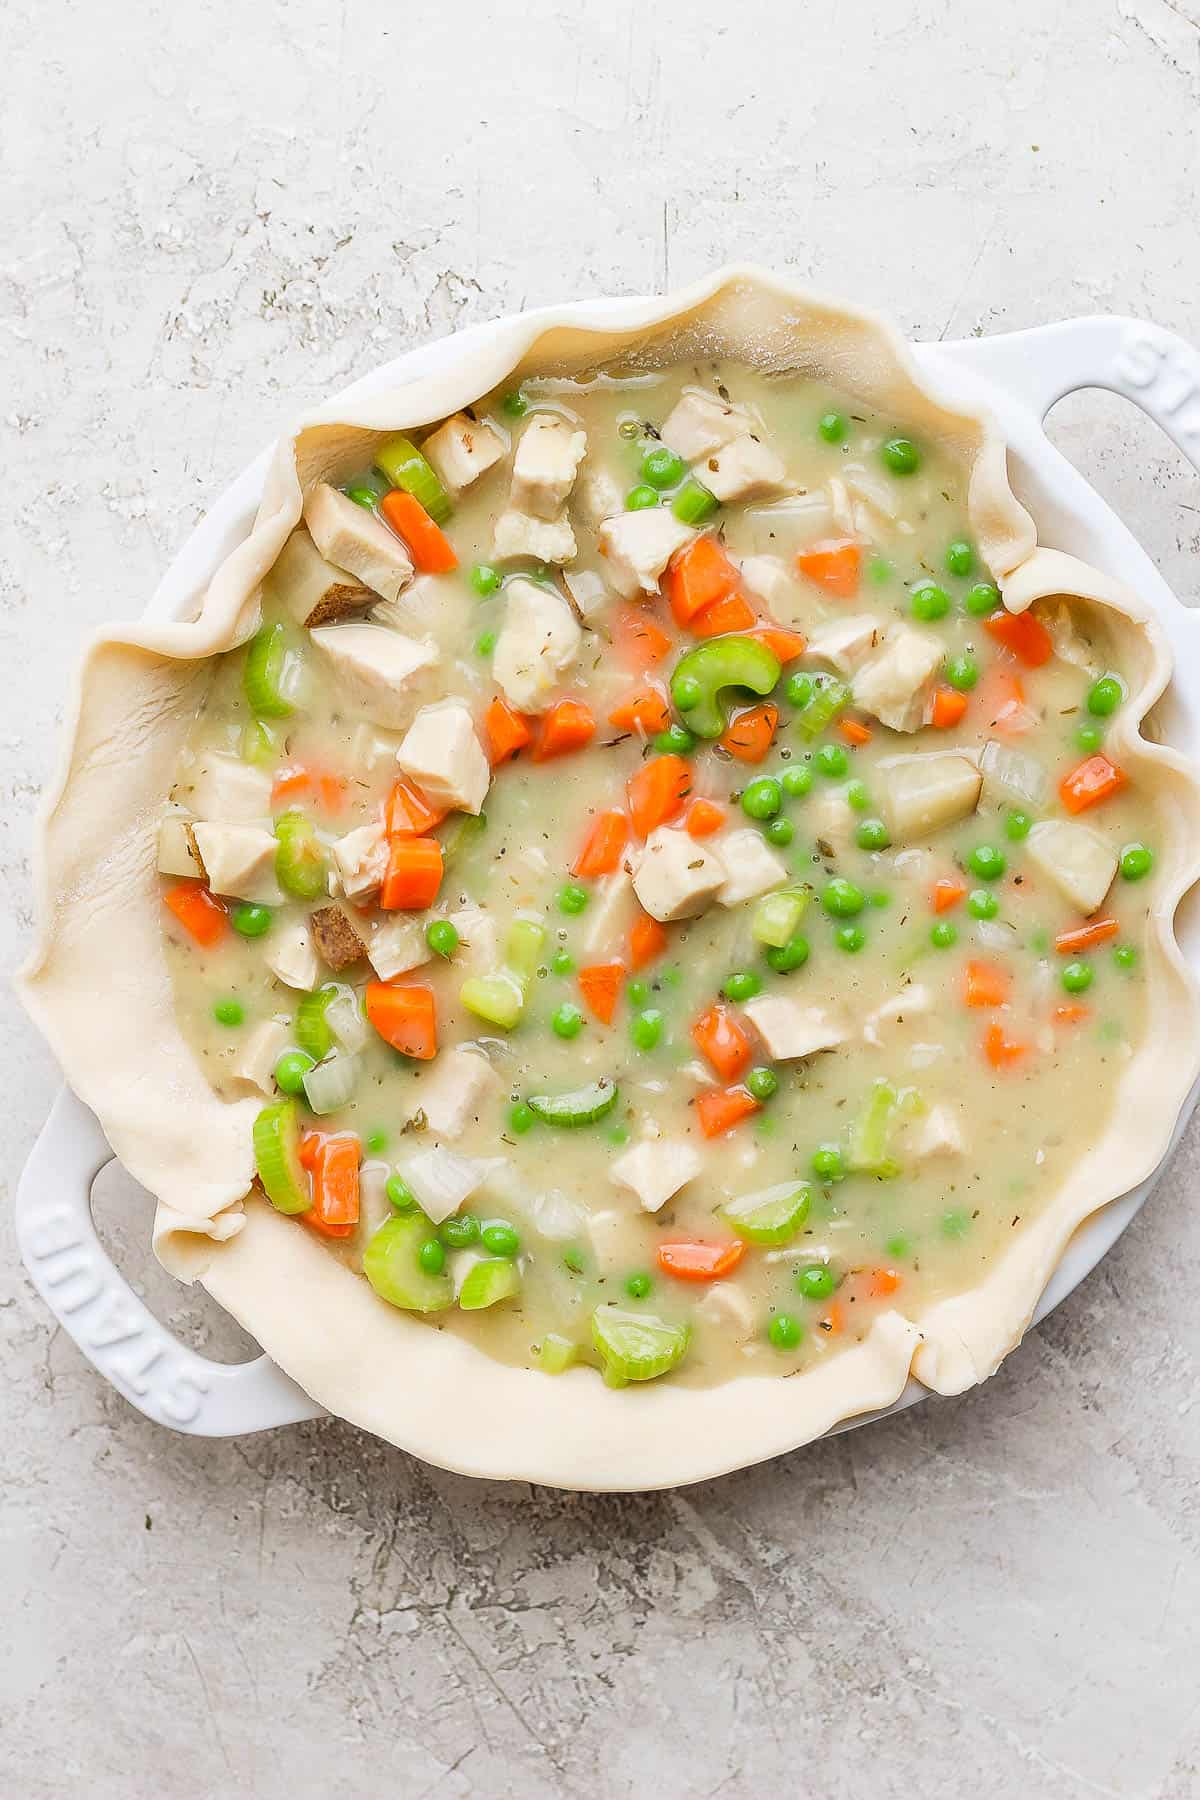 One pie crust sheet placed in a prepared baking dish with the pot pie filling added.